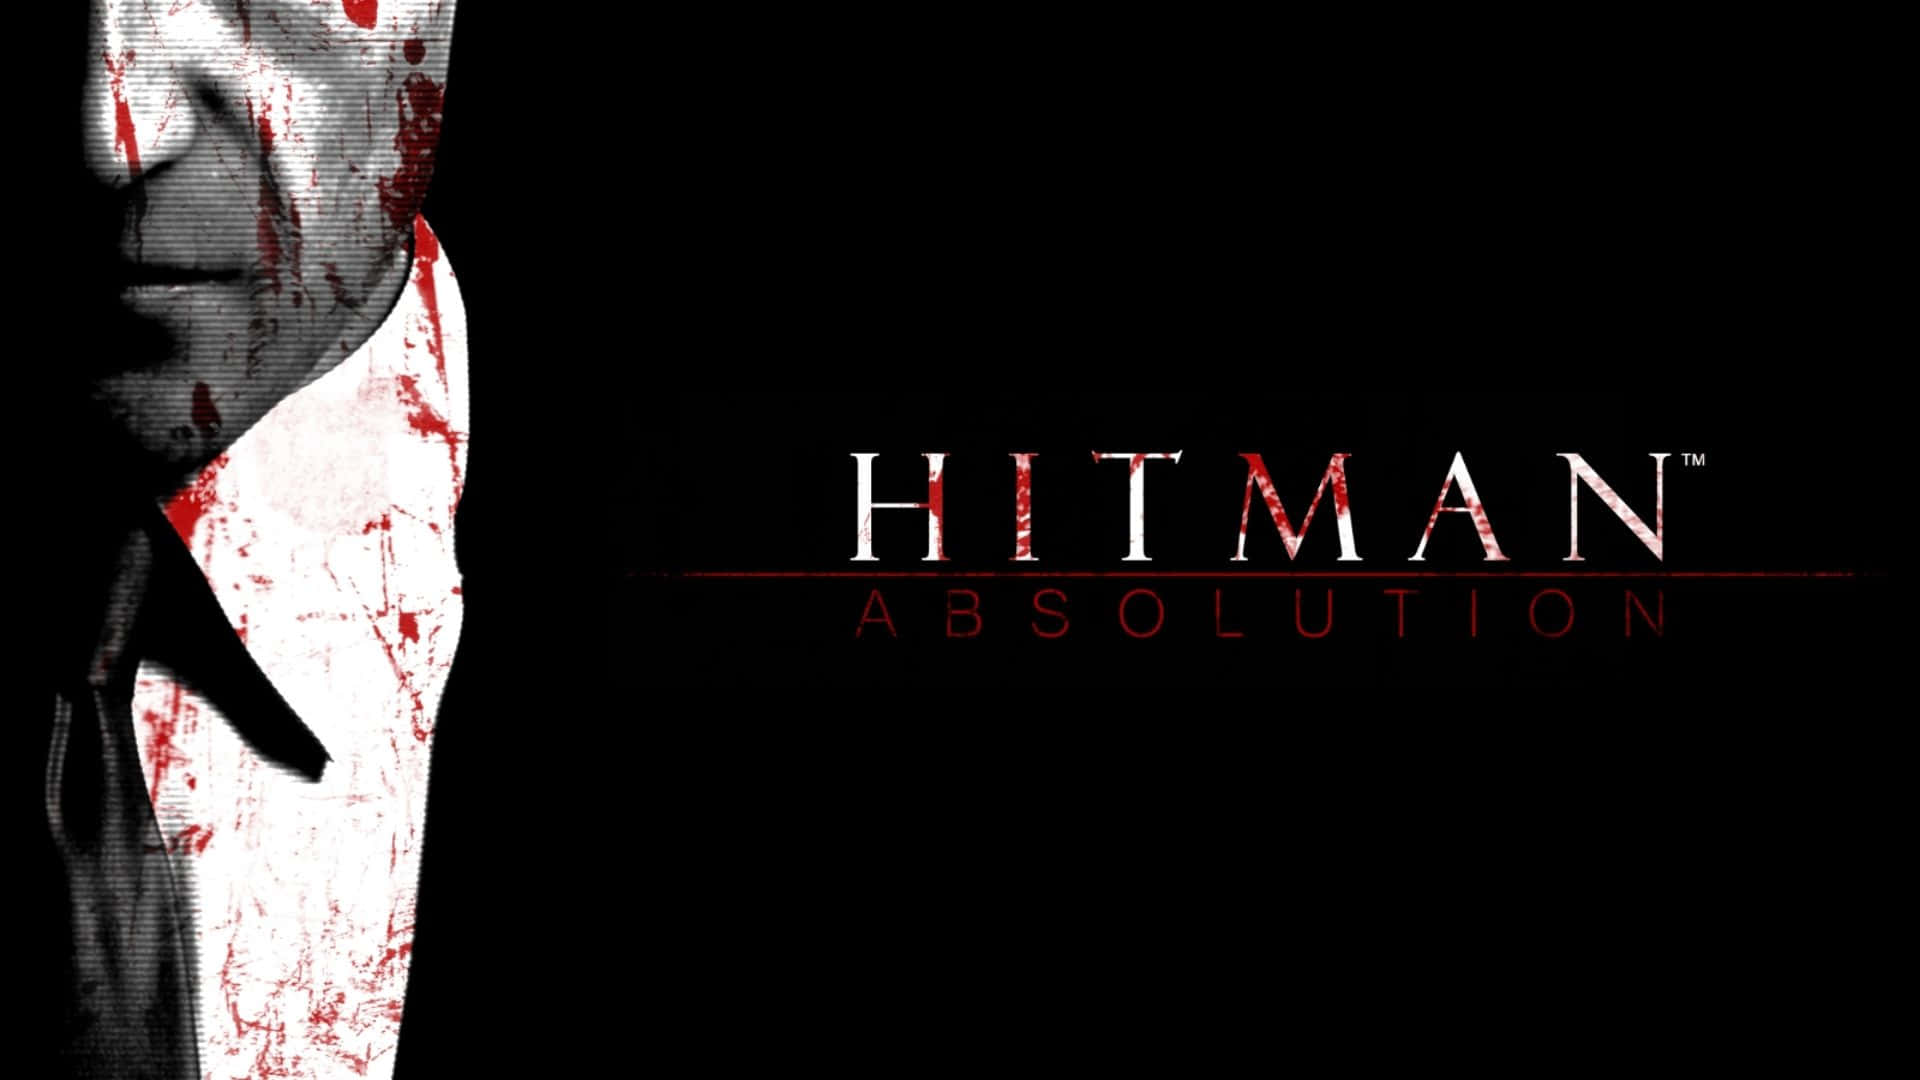 Hitman Absolution - Become the ultimate assassin